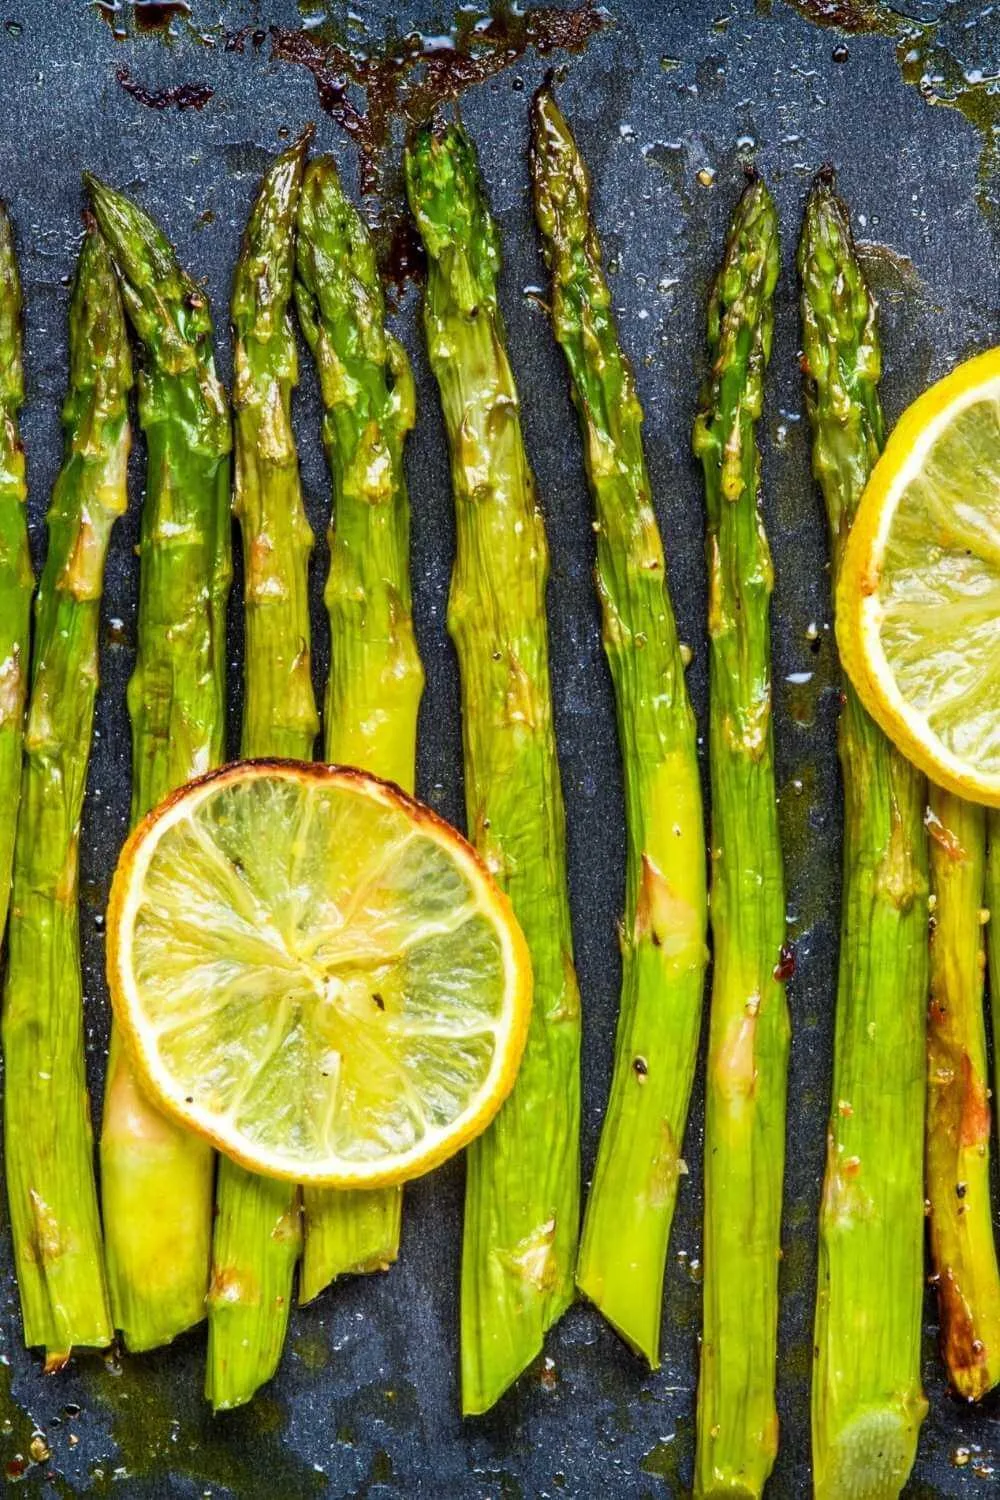 How Long To Cook Asparagus At 400